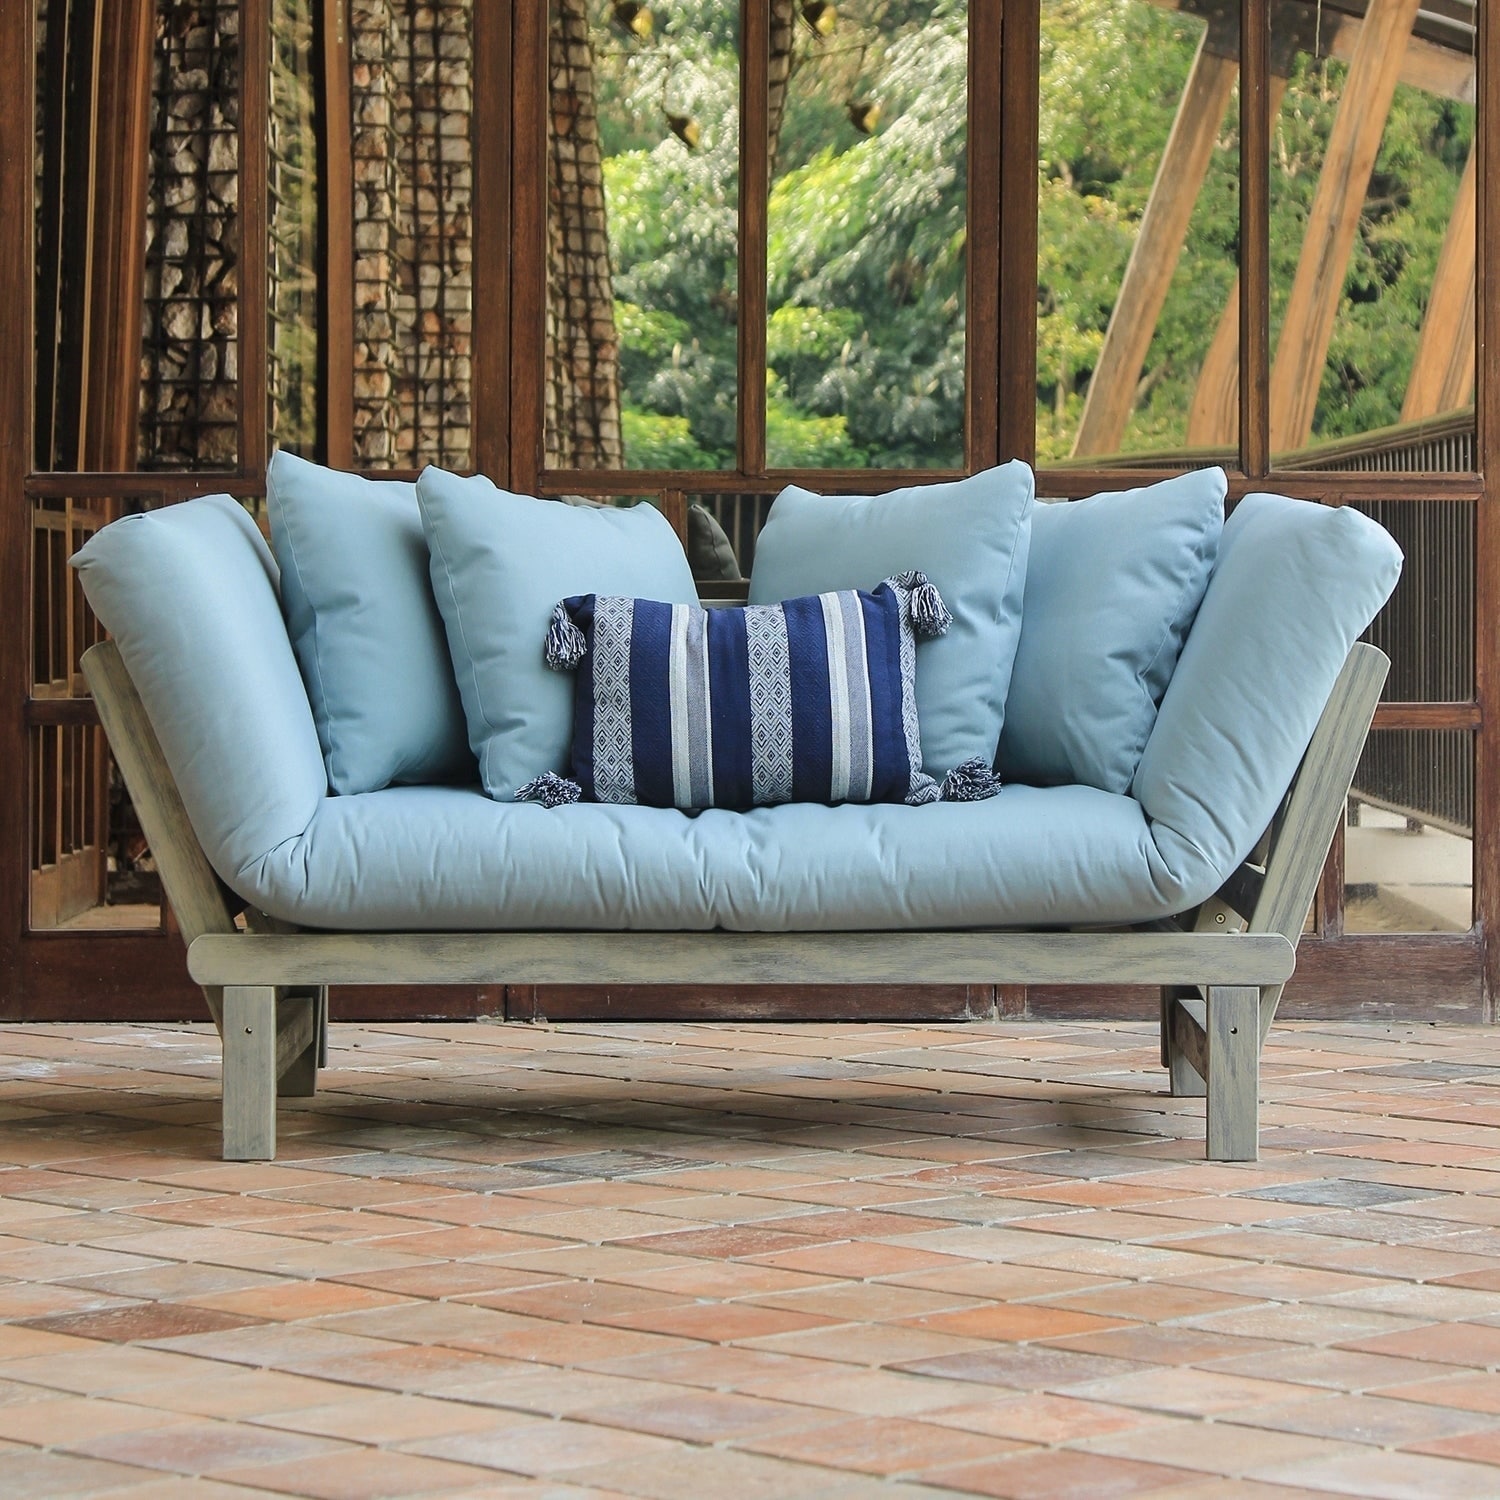 Cambridge Casual Tulle Outdoor Daybed